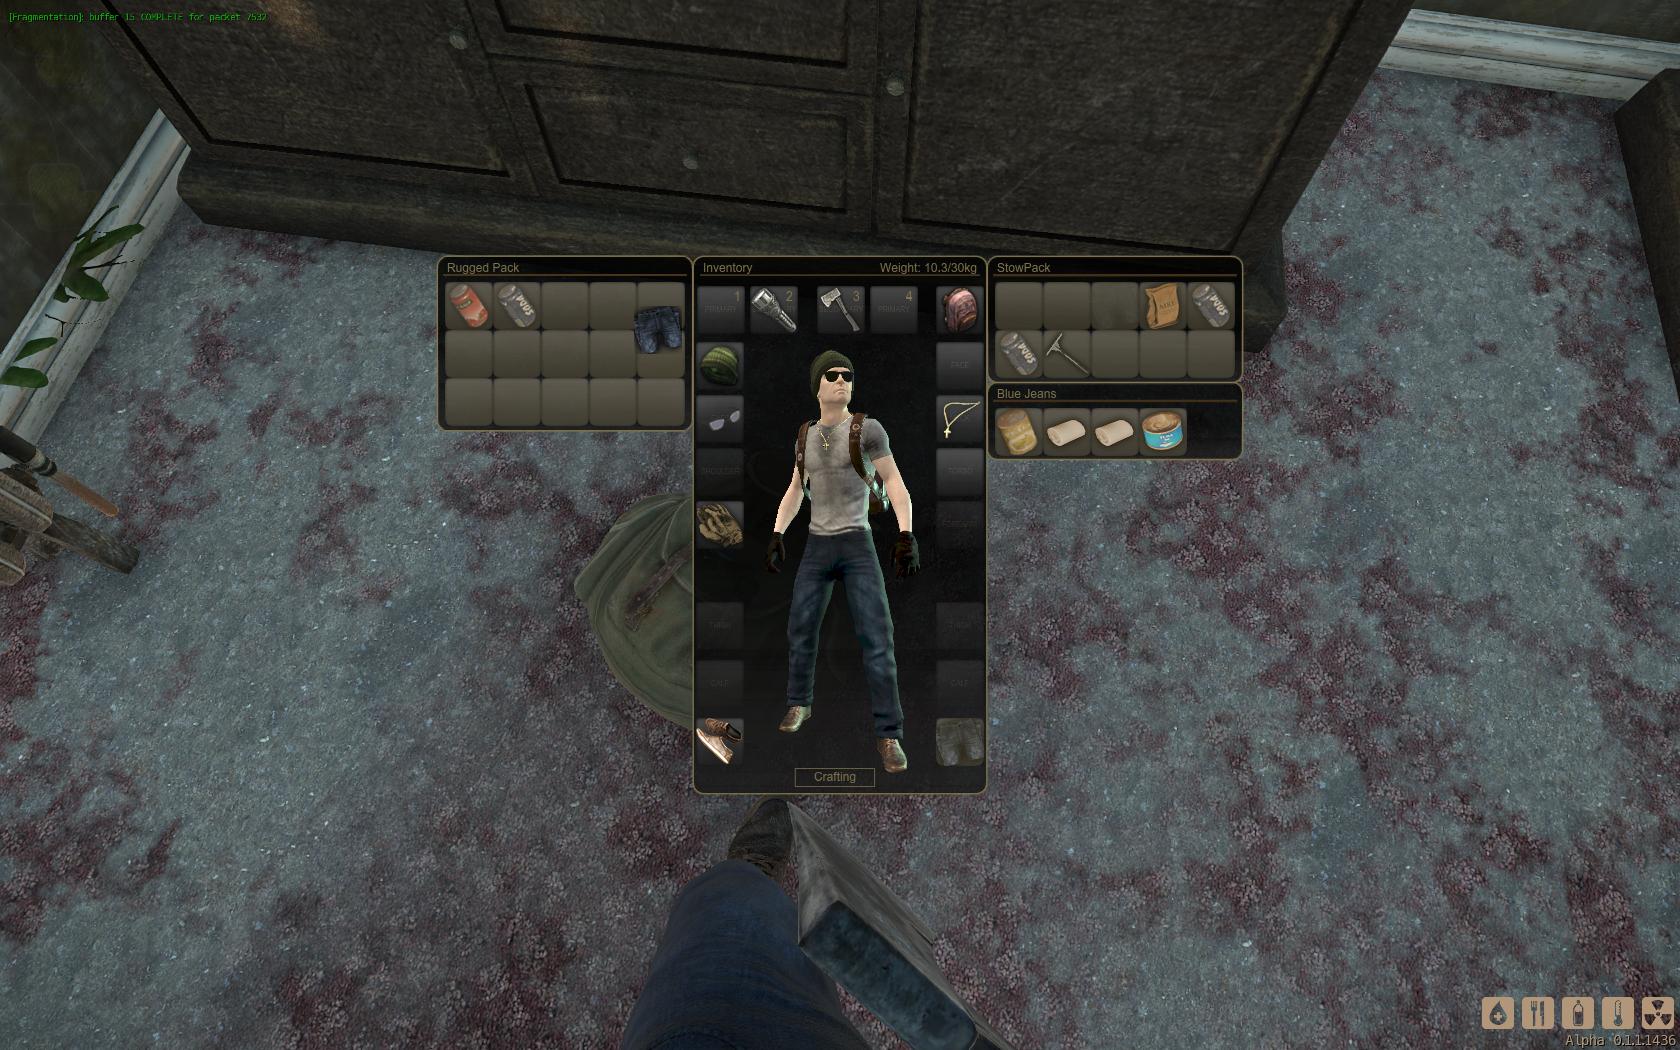 Drag-’n’-Drop is a welcome improvement over DayZ’s Accidentally Drop.